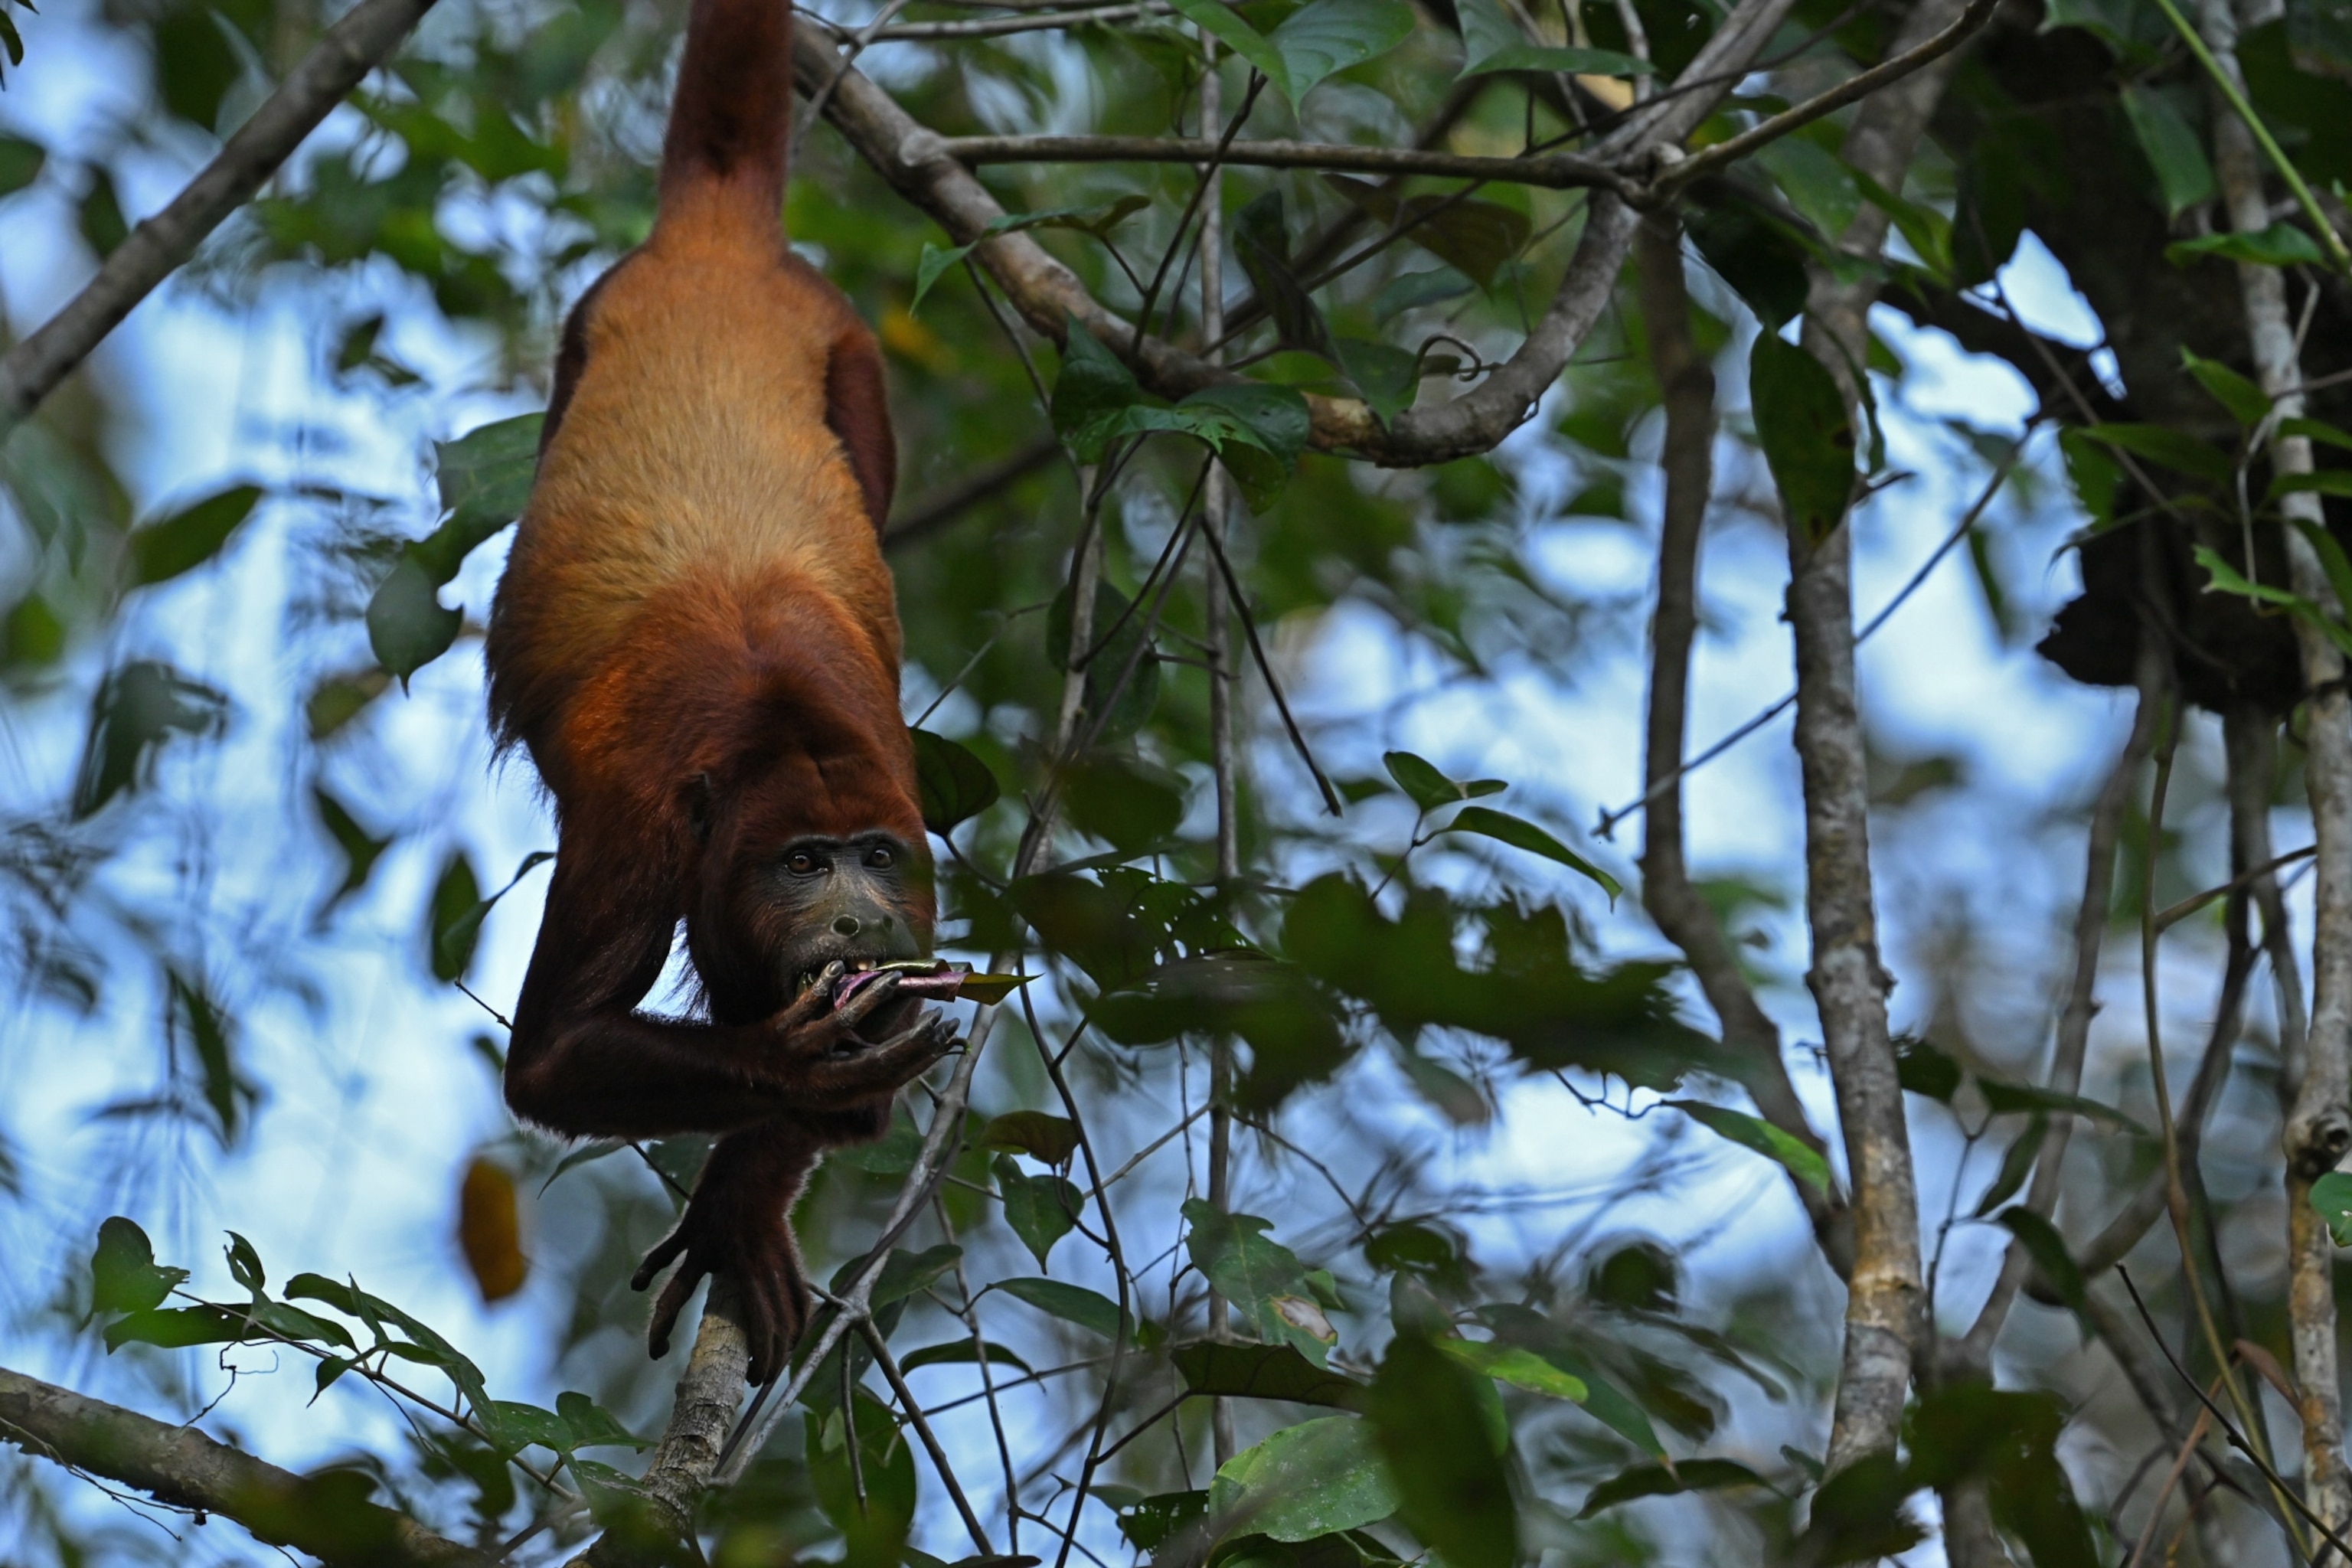 A red howler monkey (Alouatta seniculus) seated in a tree picking leaves and fruits